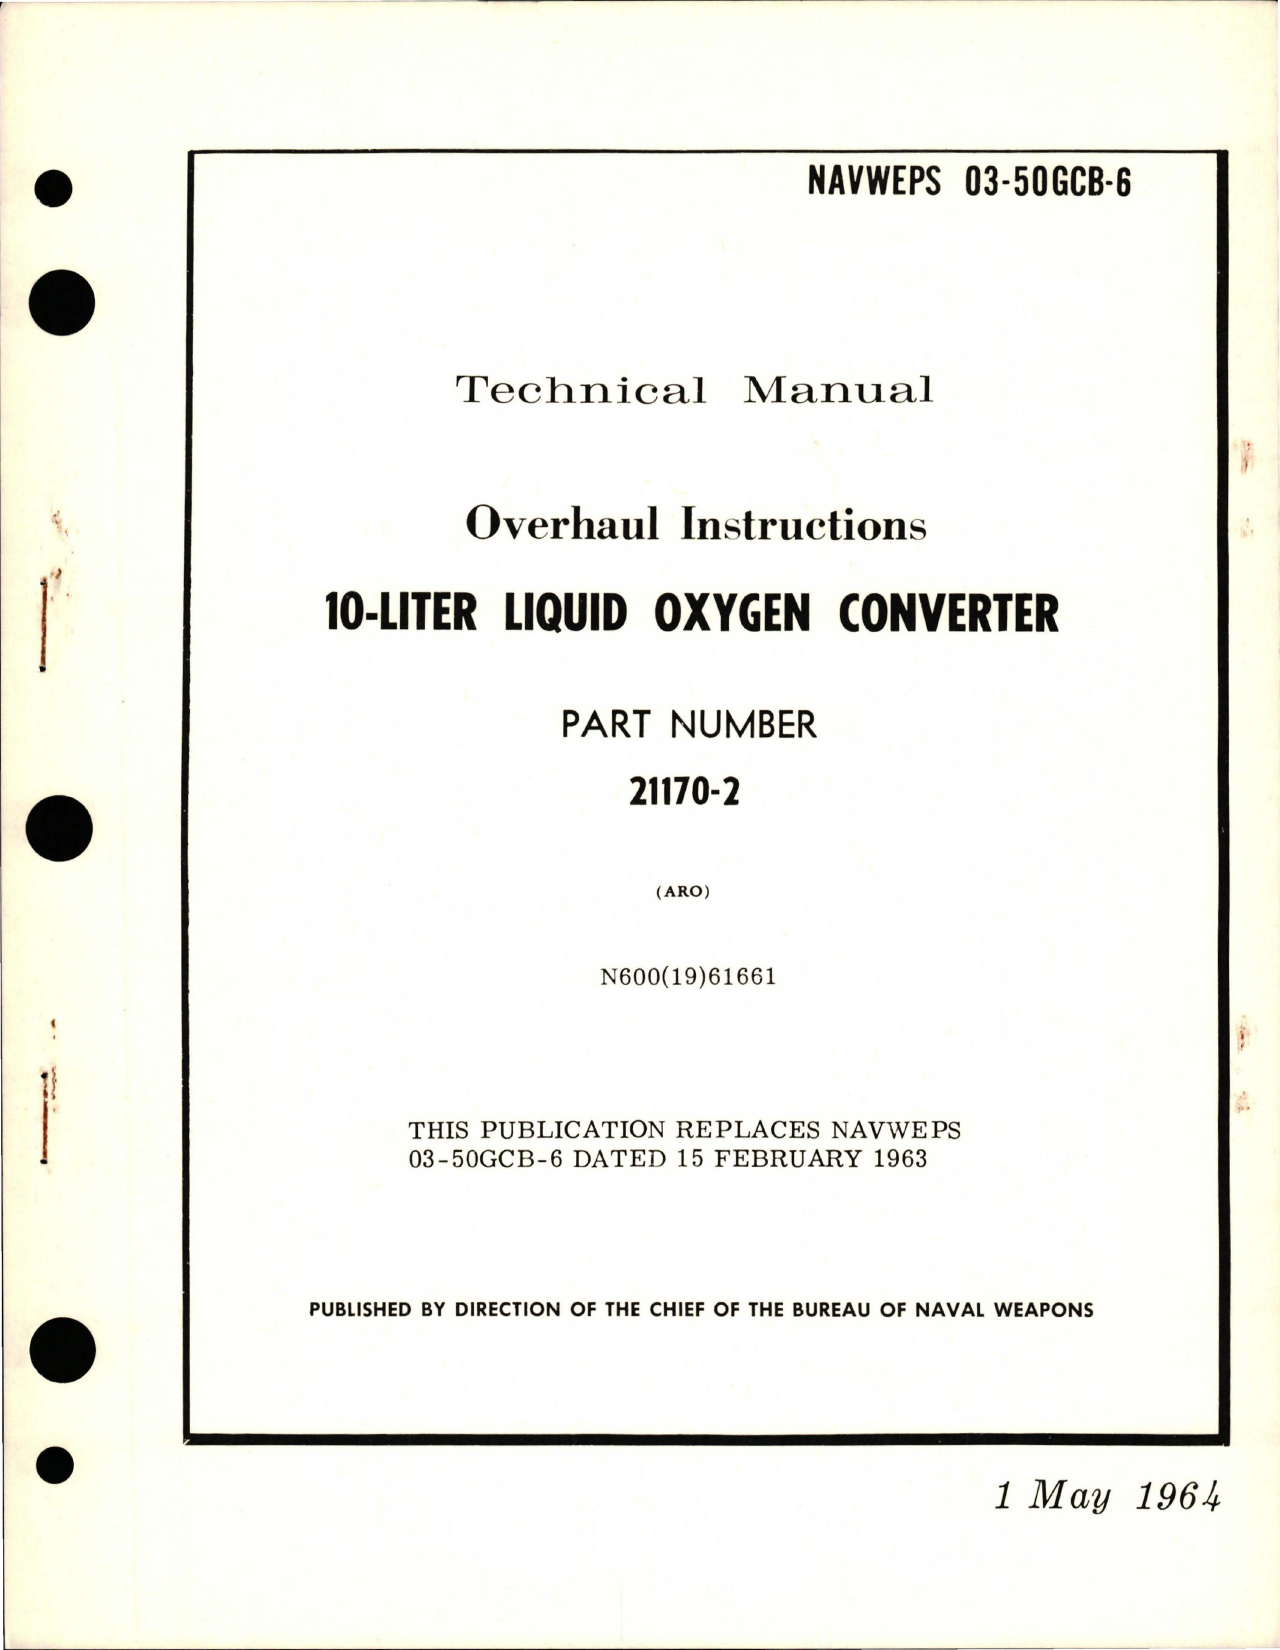 Sample page 1 from AirCorps Library document: Overhaul Instructions for 10-Liter Liquid Oxygen Converter - Part 21170-2 